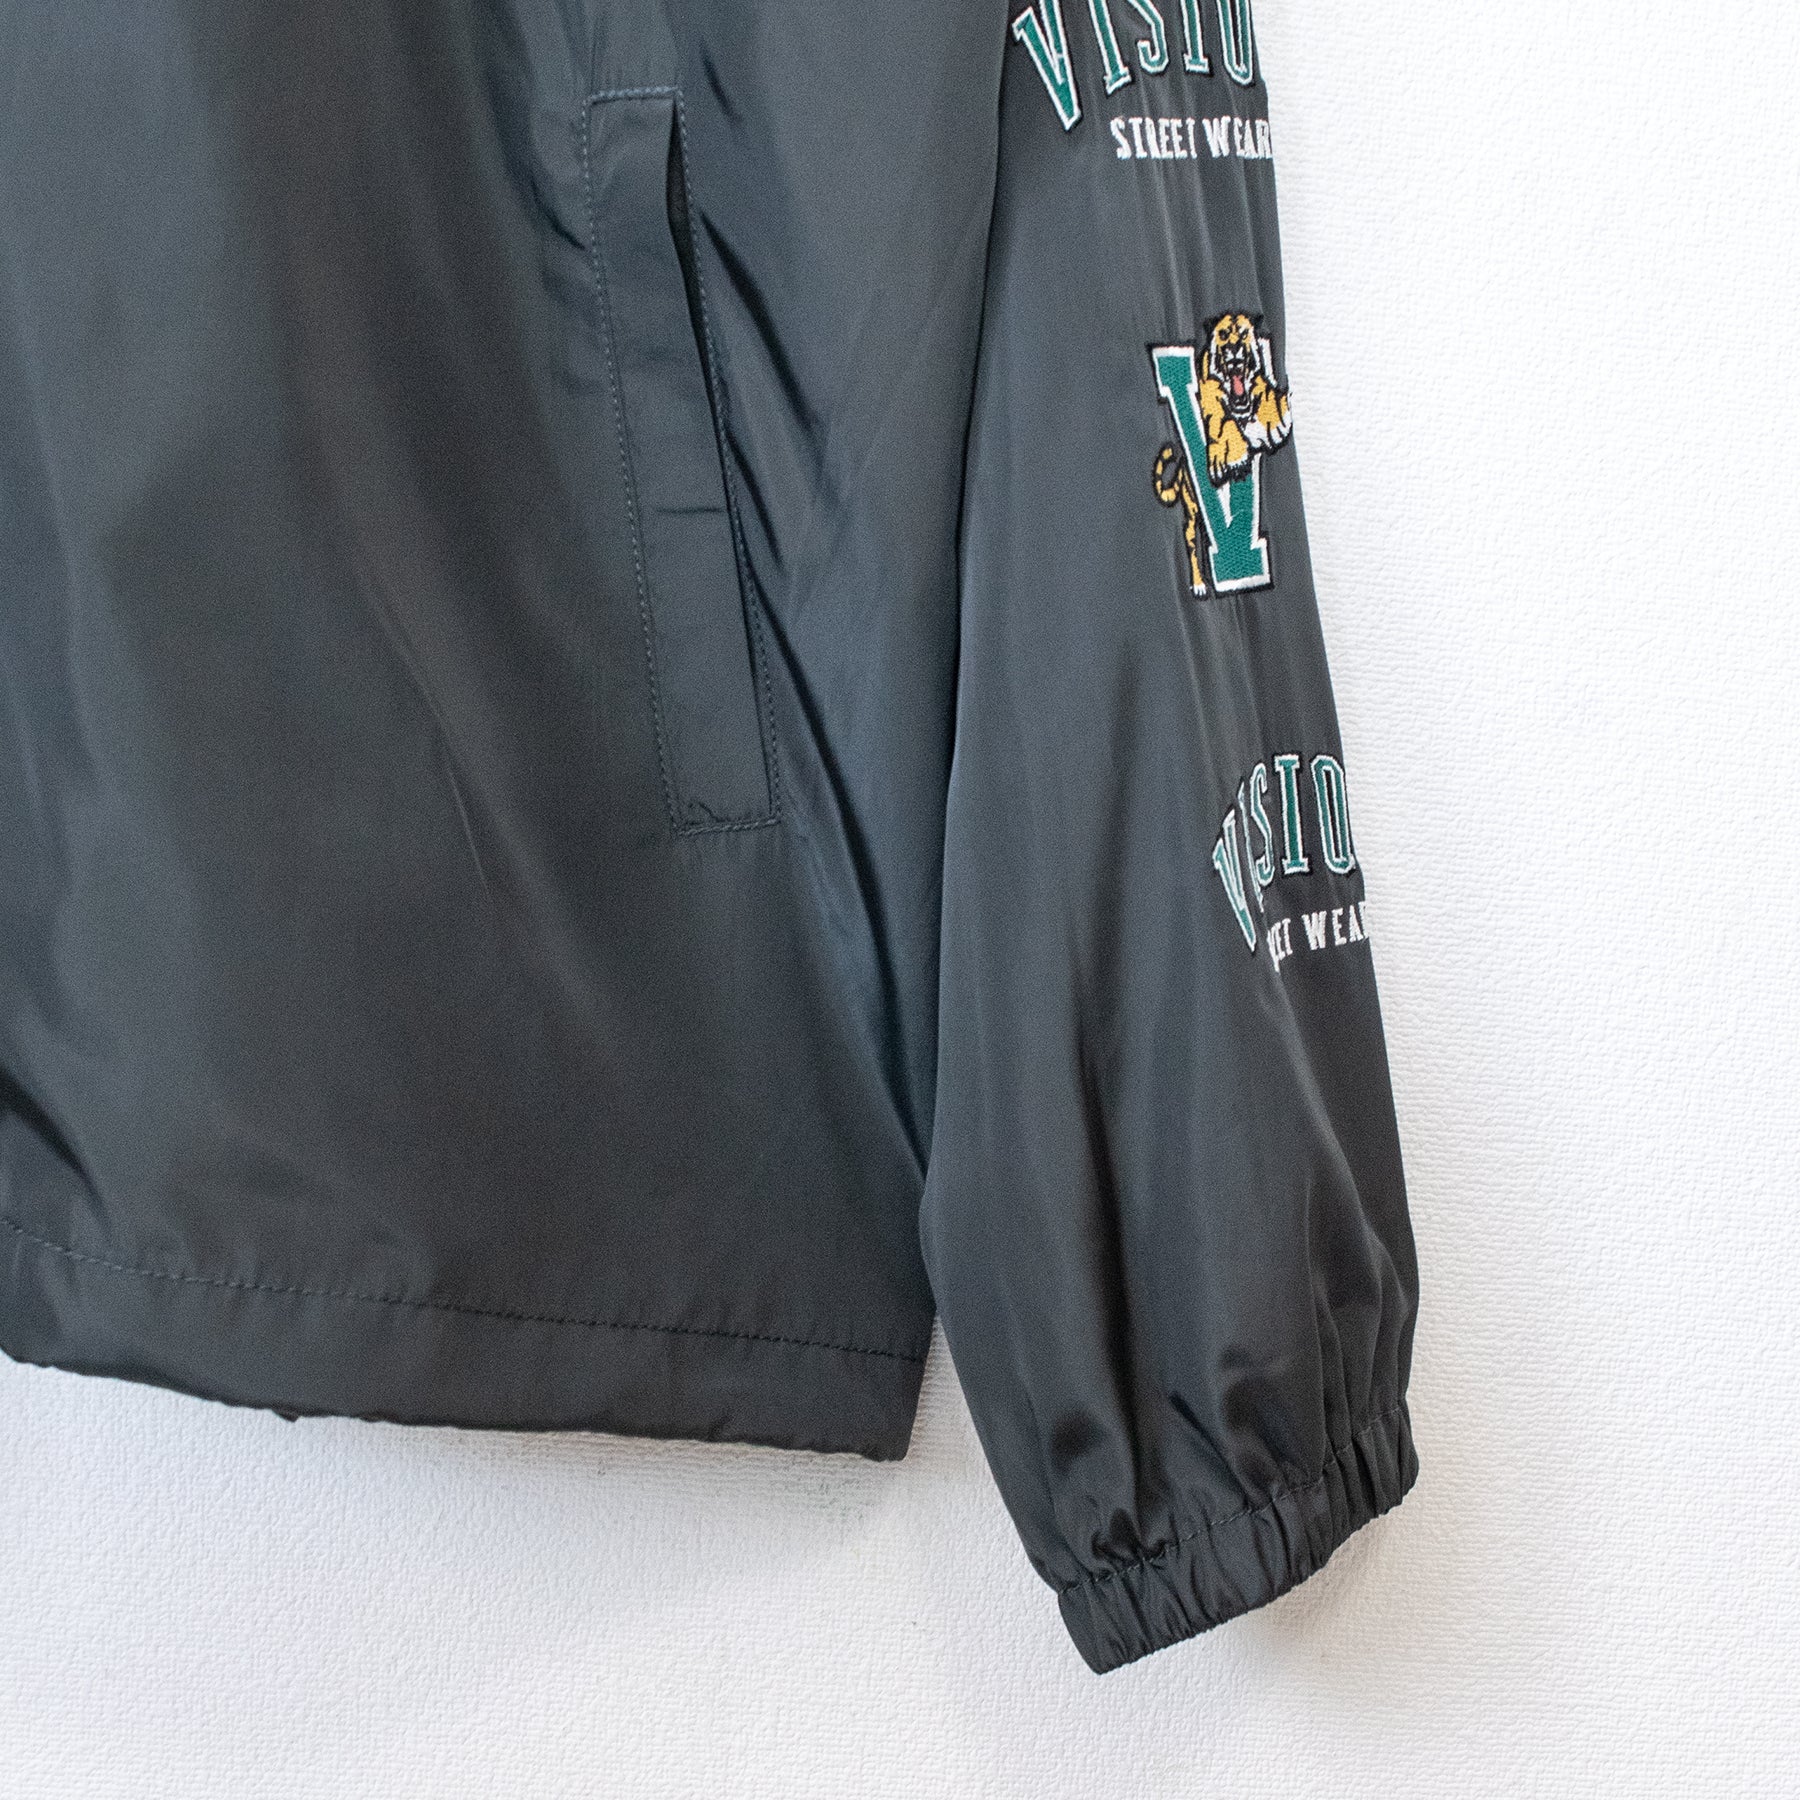 VISION STREET WEAR Embroidery Sleeve Coach Jacket – YOUAREMYPOISON